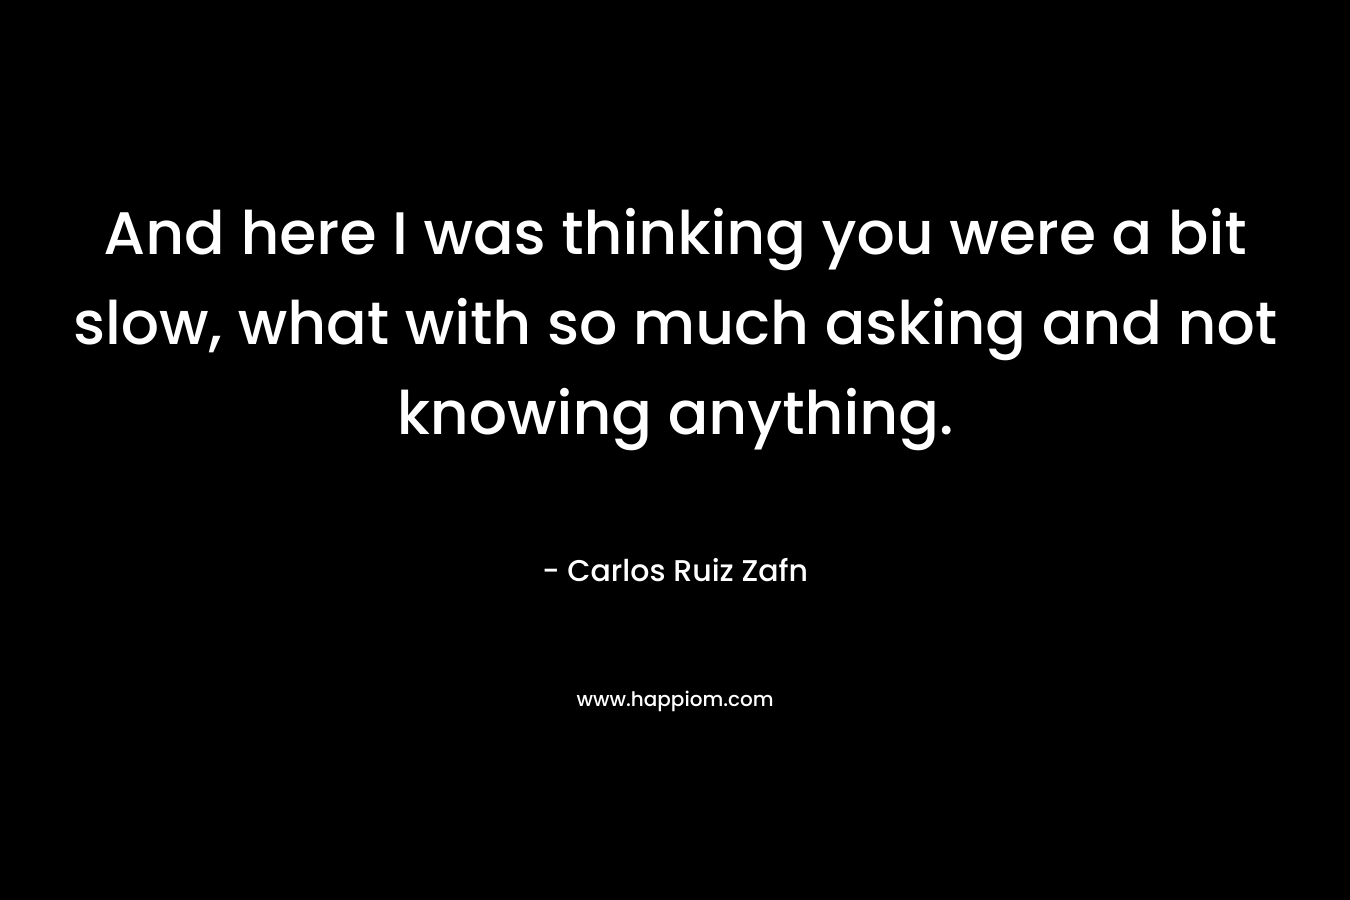 And here I was thinking you were a bit slow, what with so much asking and not knowing anything. – Carlos Ruiz Zafn